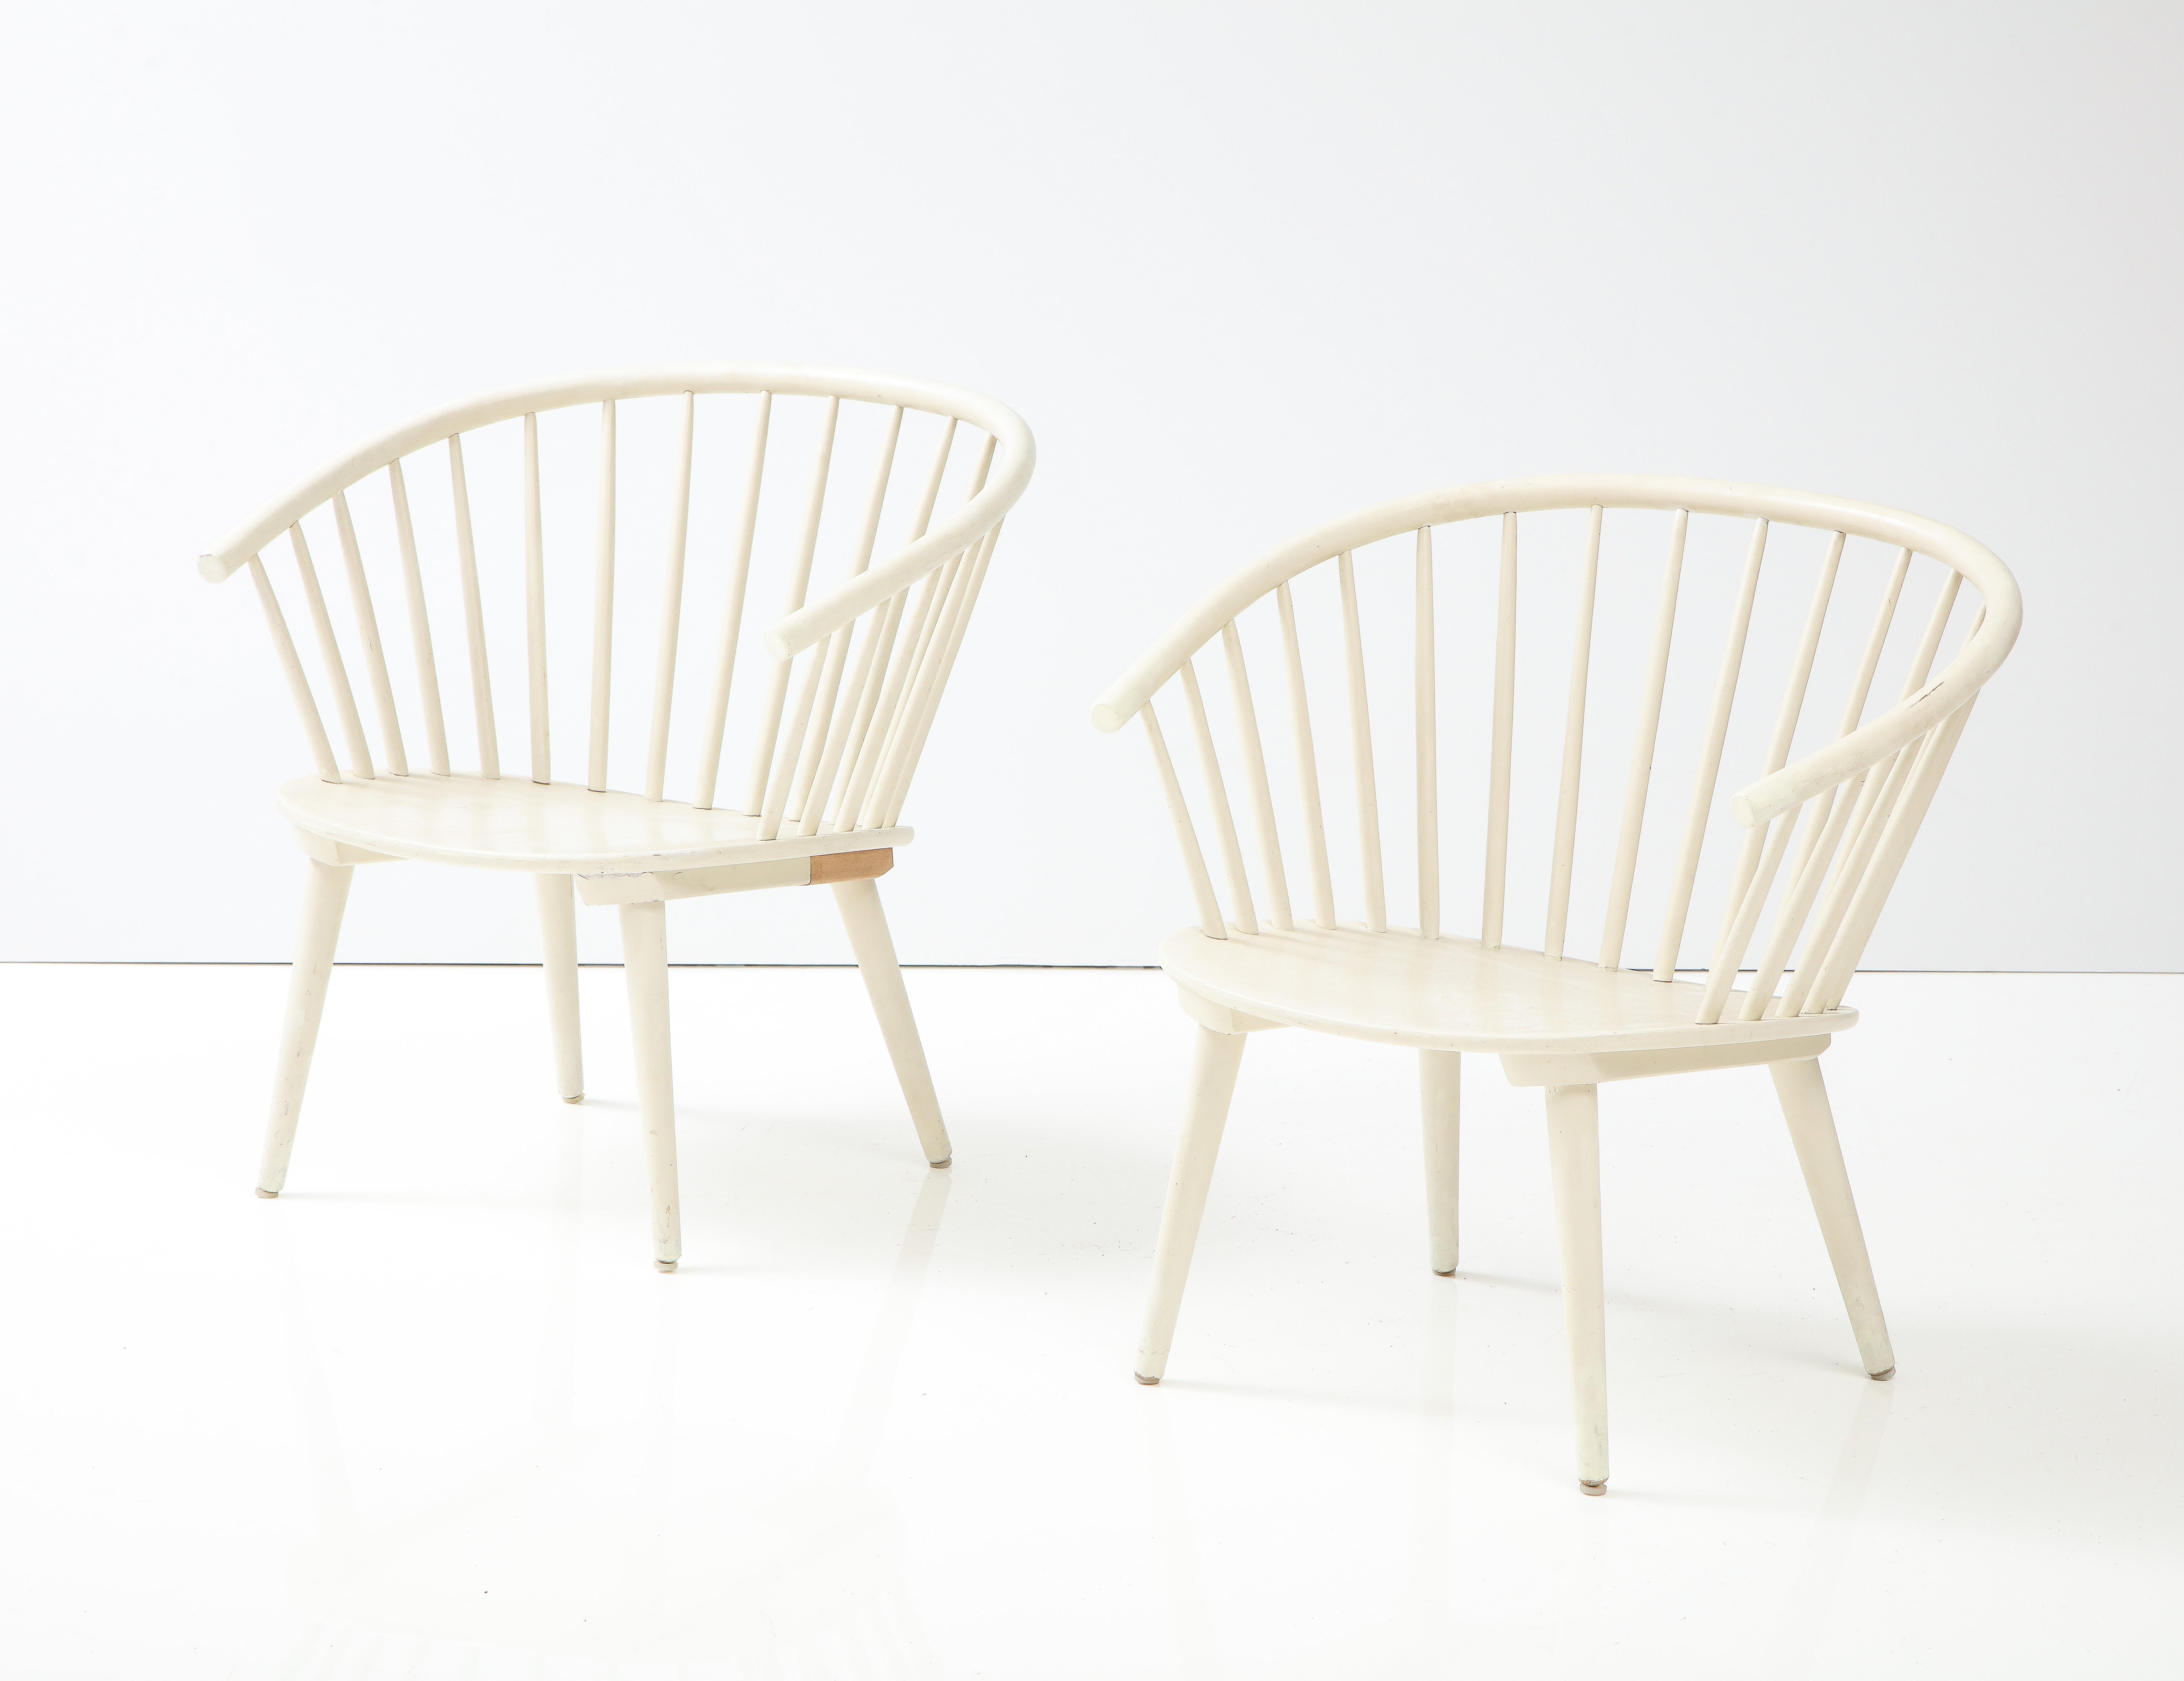 Beech Pair of White Swedish Horseshoe Back Armchairs, Sweden, C. 1964 For Sale